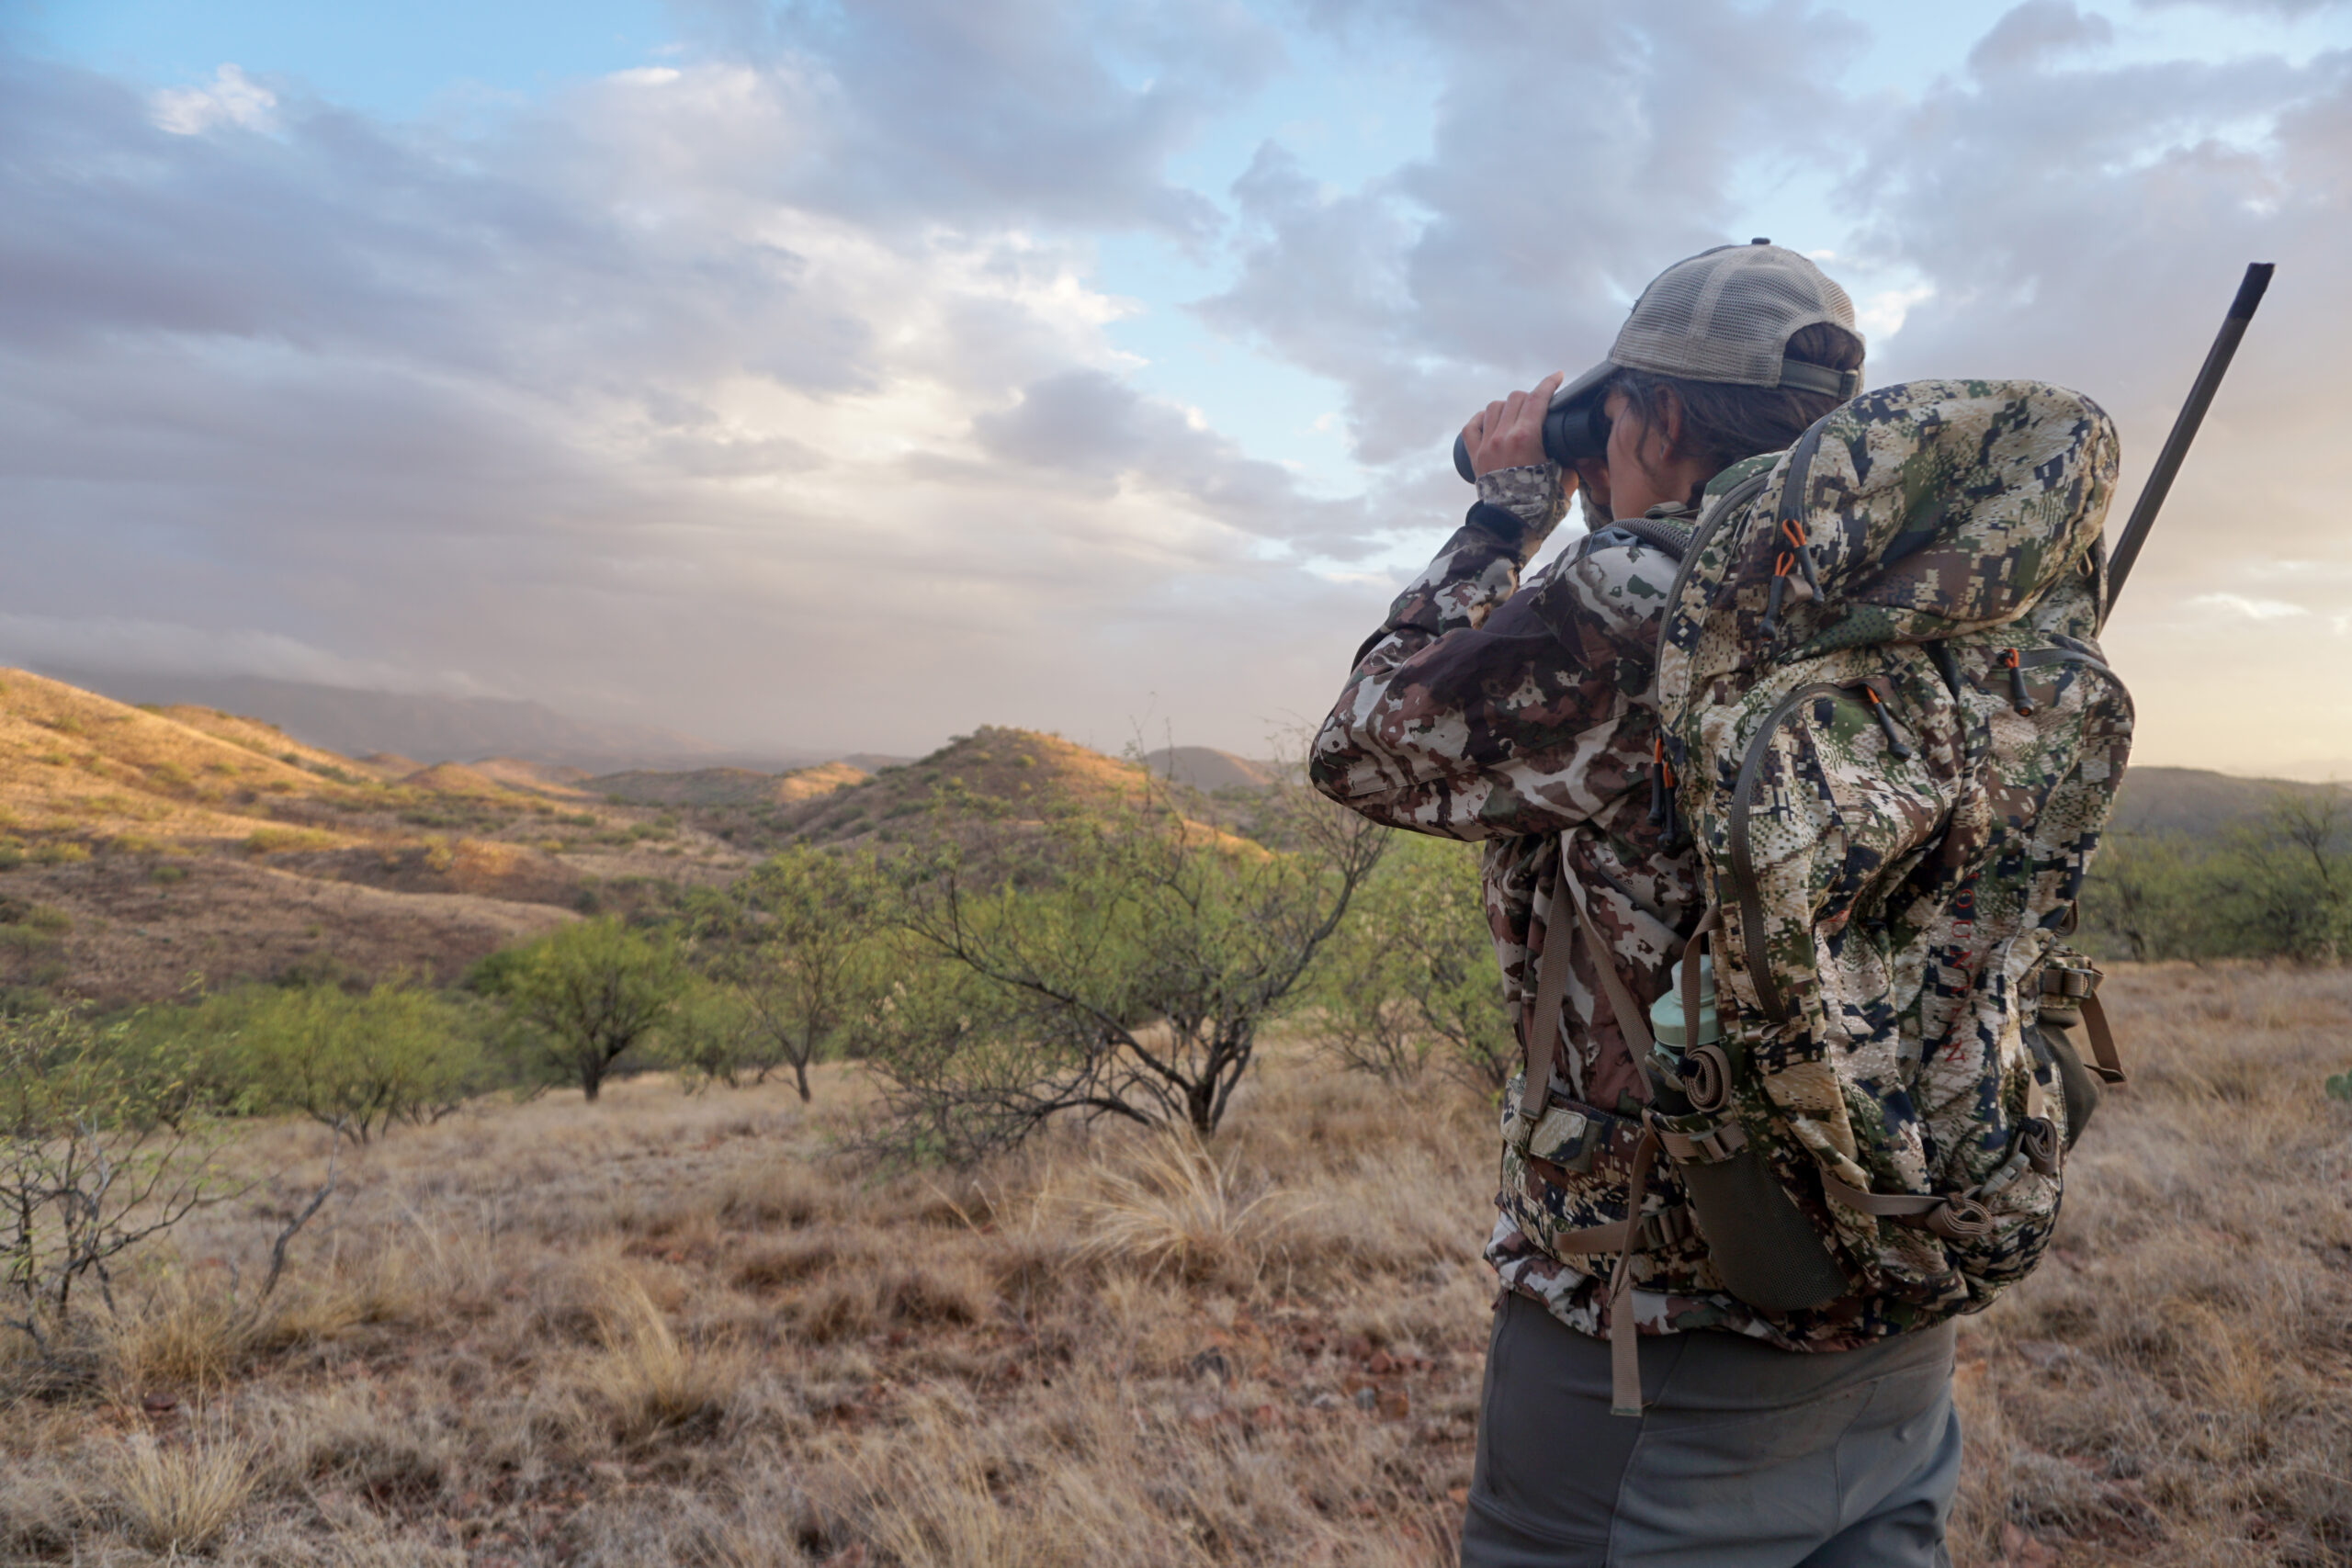 Glassing for Coues deer.